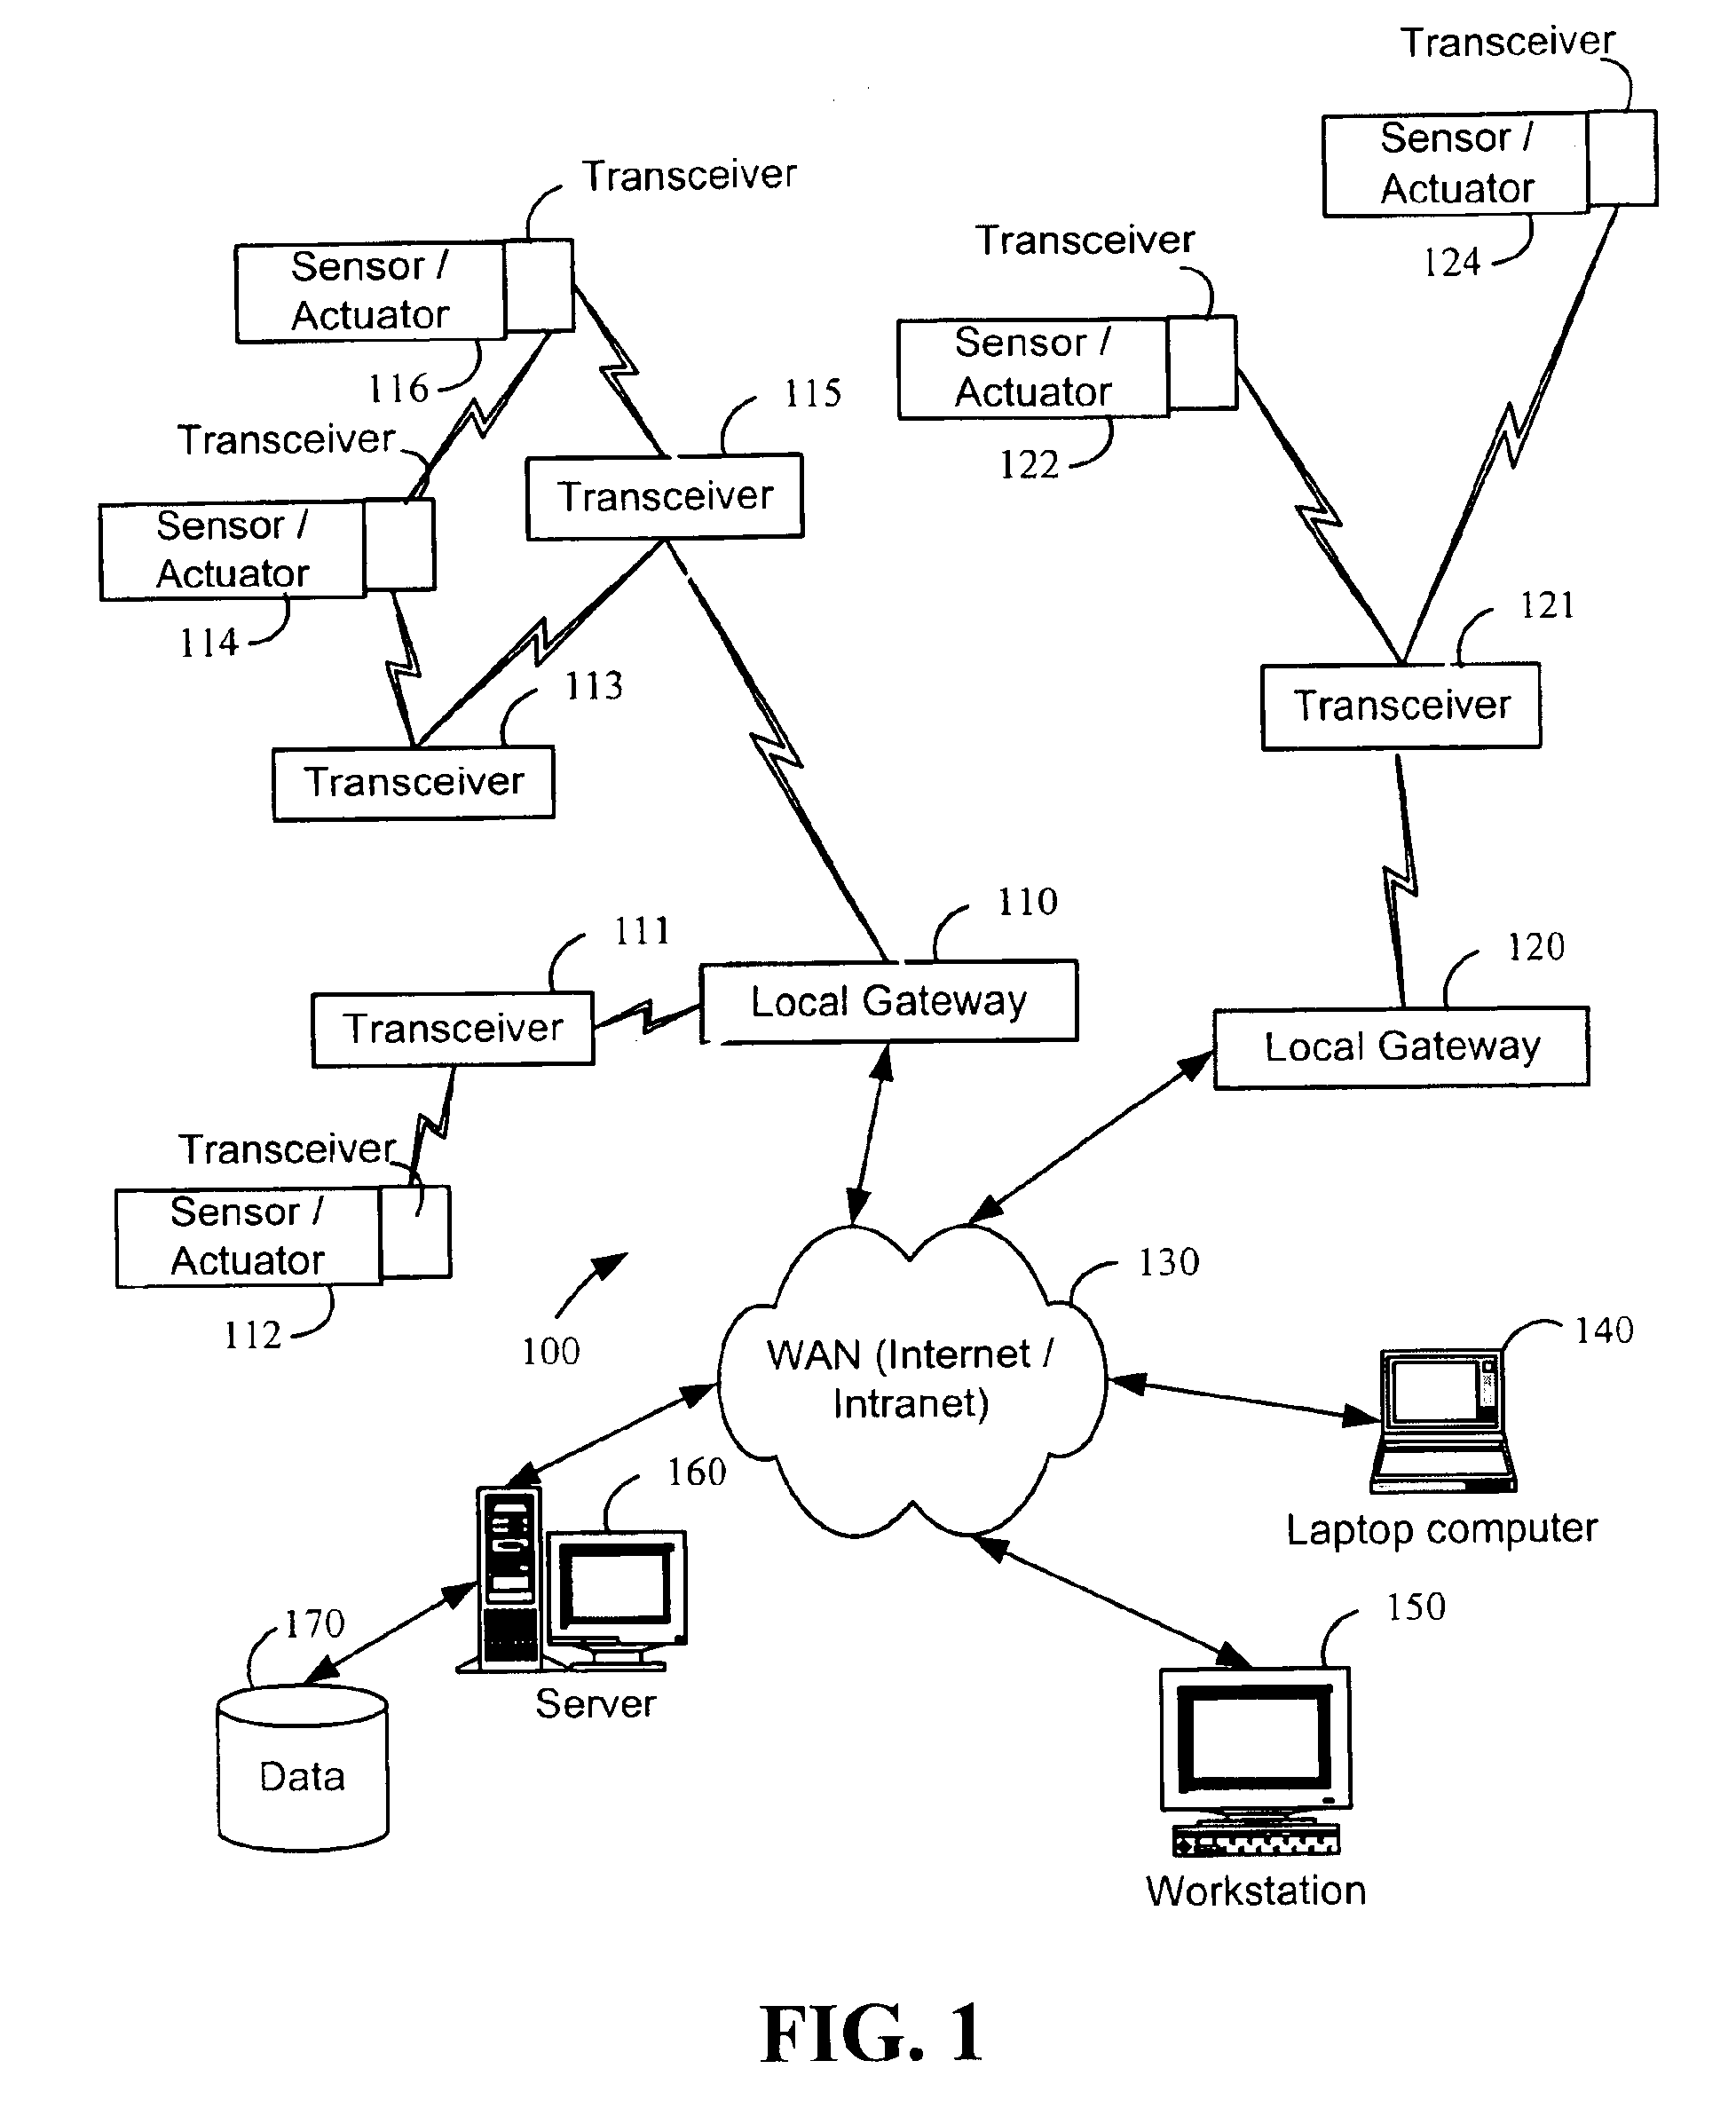 User interface for monitoring remote devices